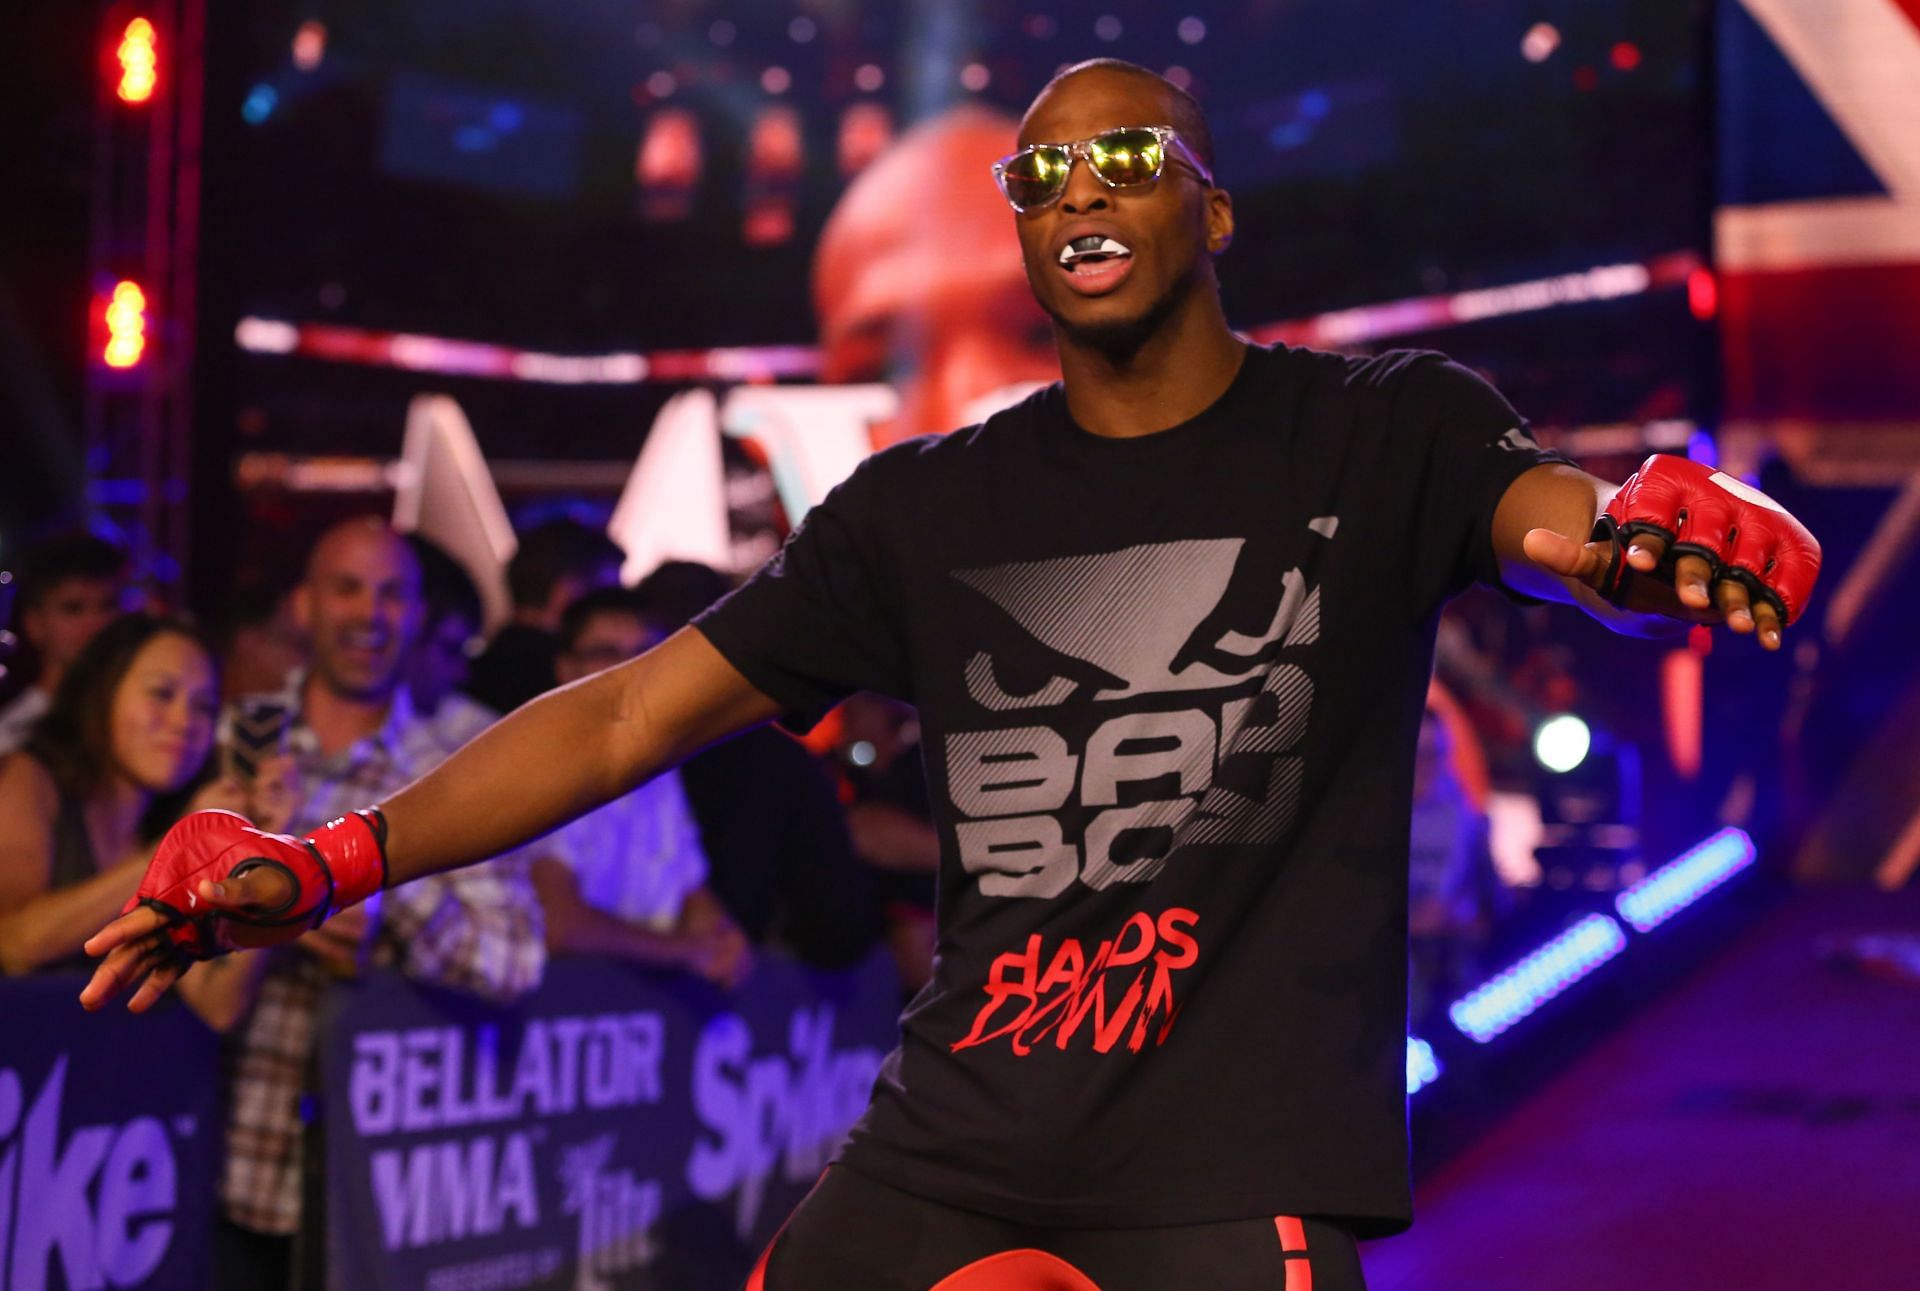 Michael Page could make for a good fight for Nate Diaz in Bellator